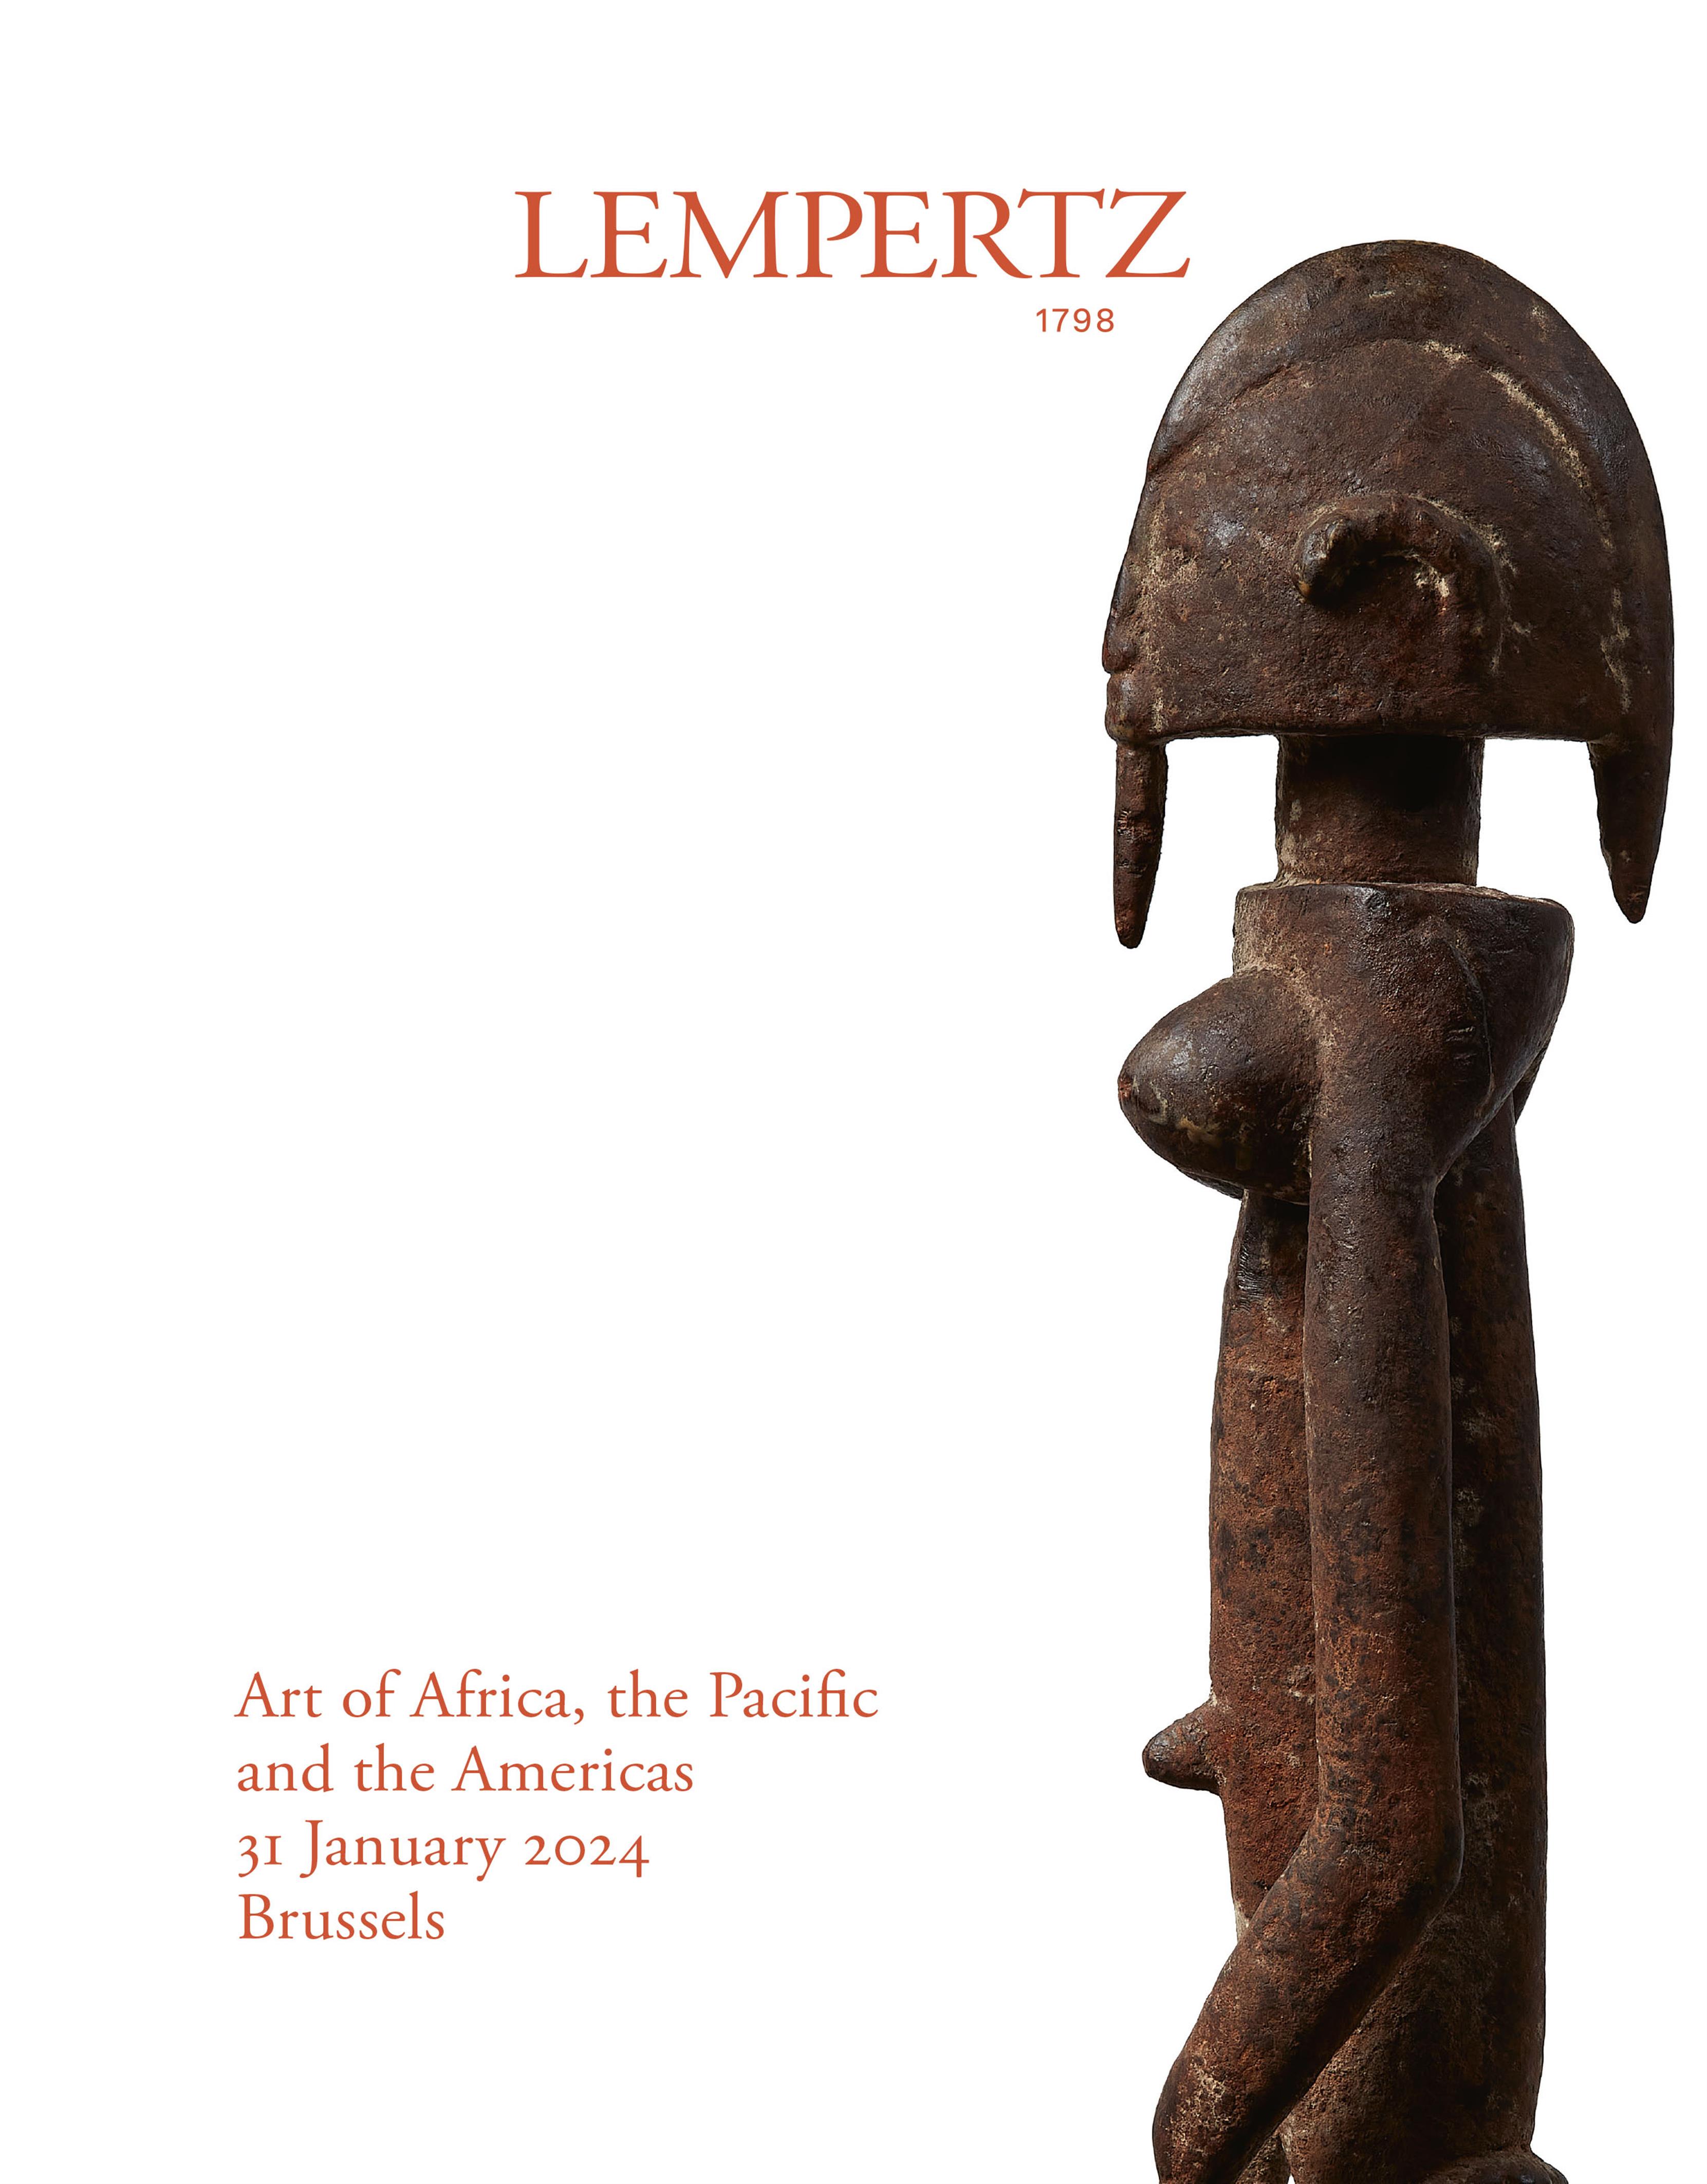 Auktionskatalog - Art of Africa, the Pacific and the Americas - Online Catalogue - Auction 1241 – Purchase valuable works of art at the next Lempertz-Auction!